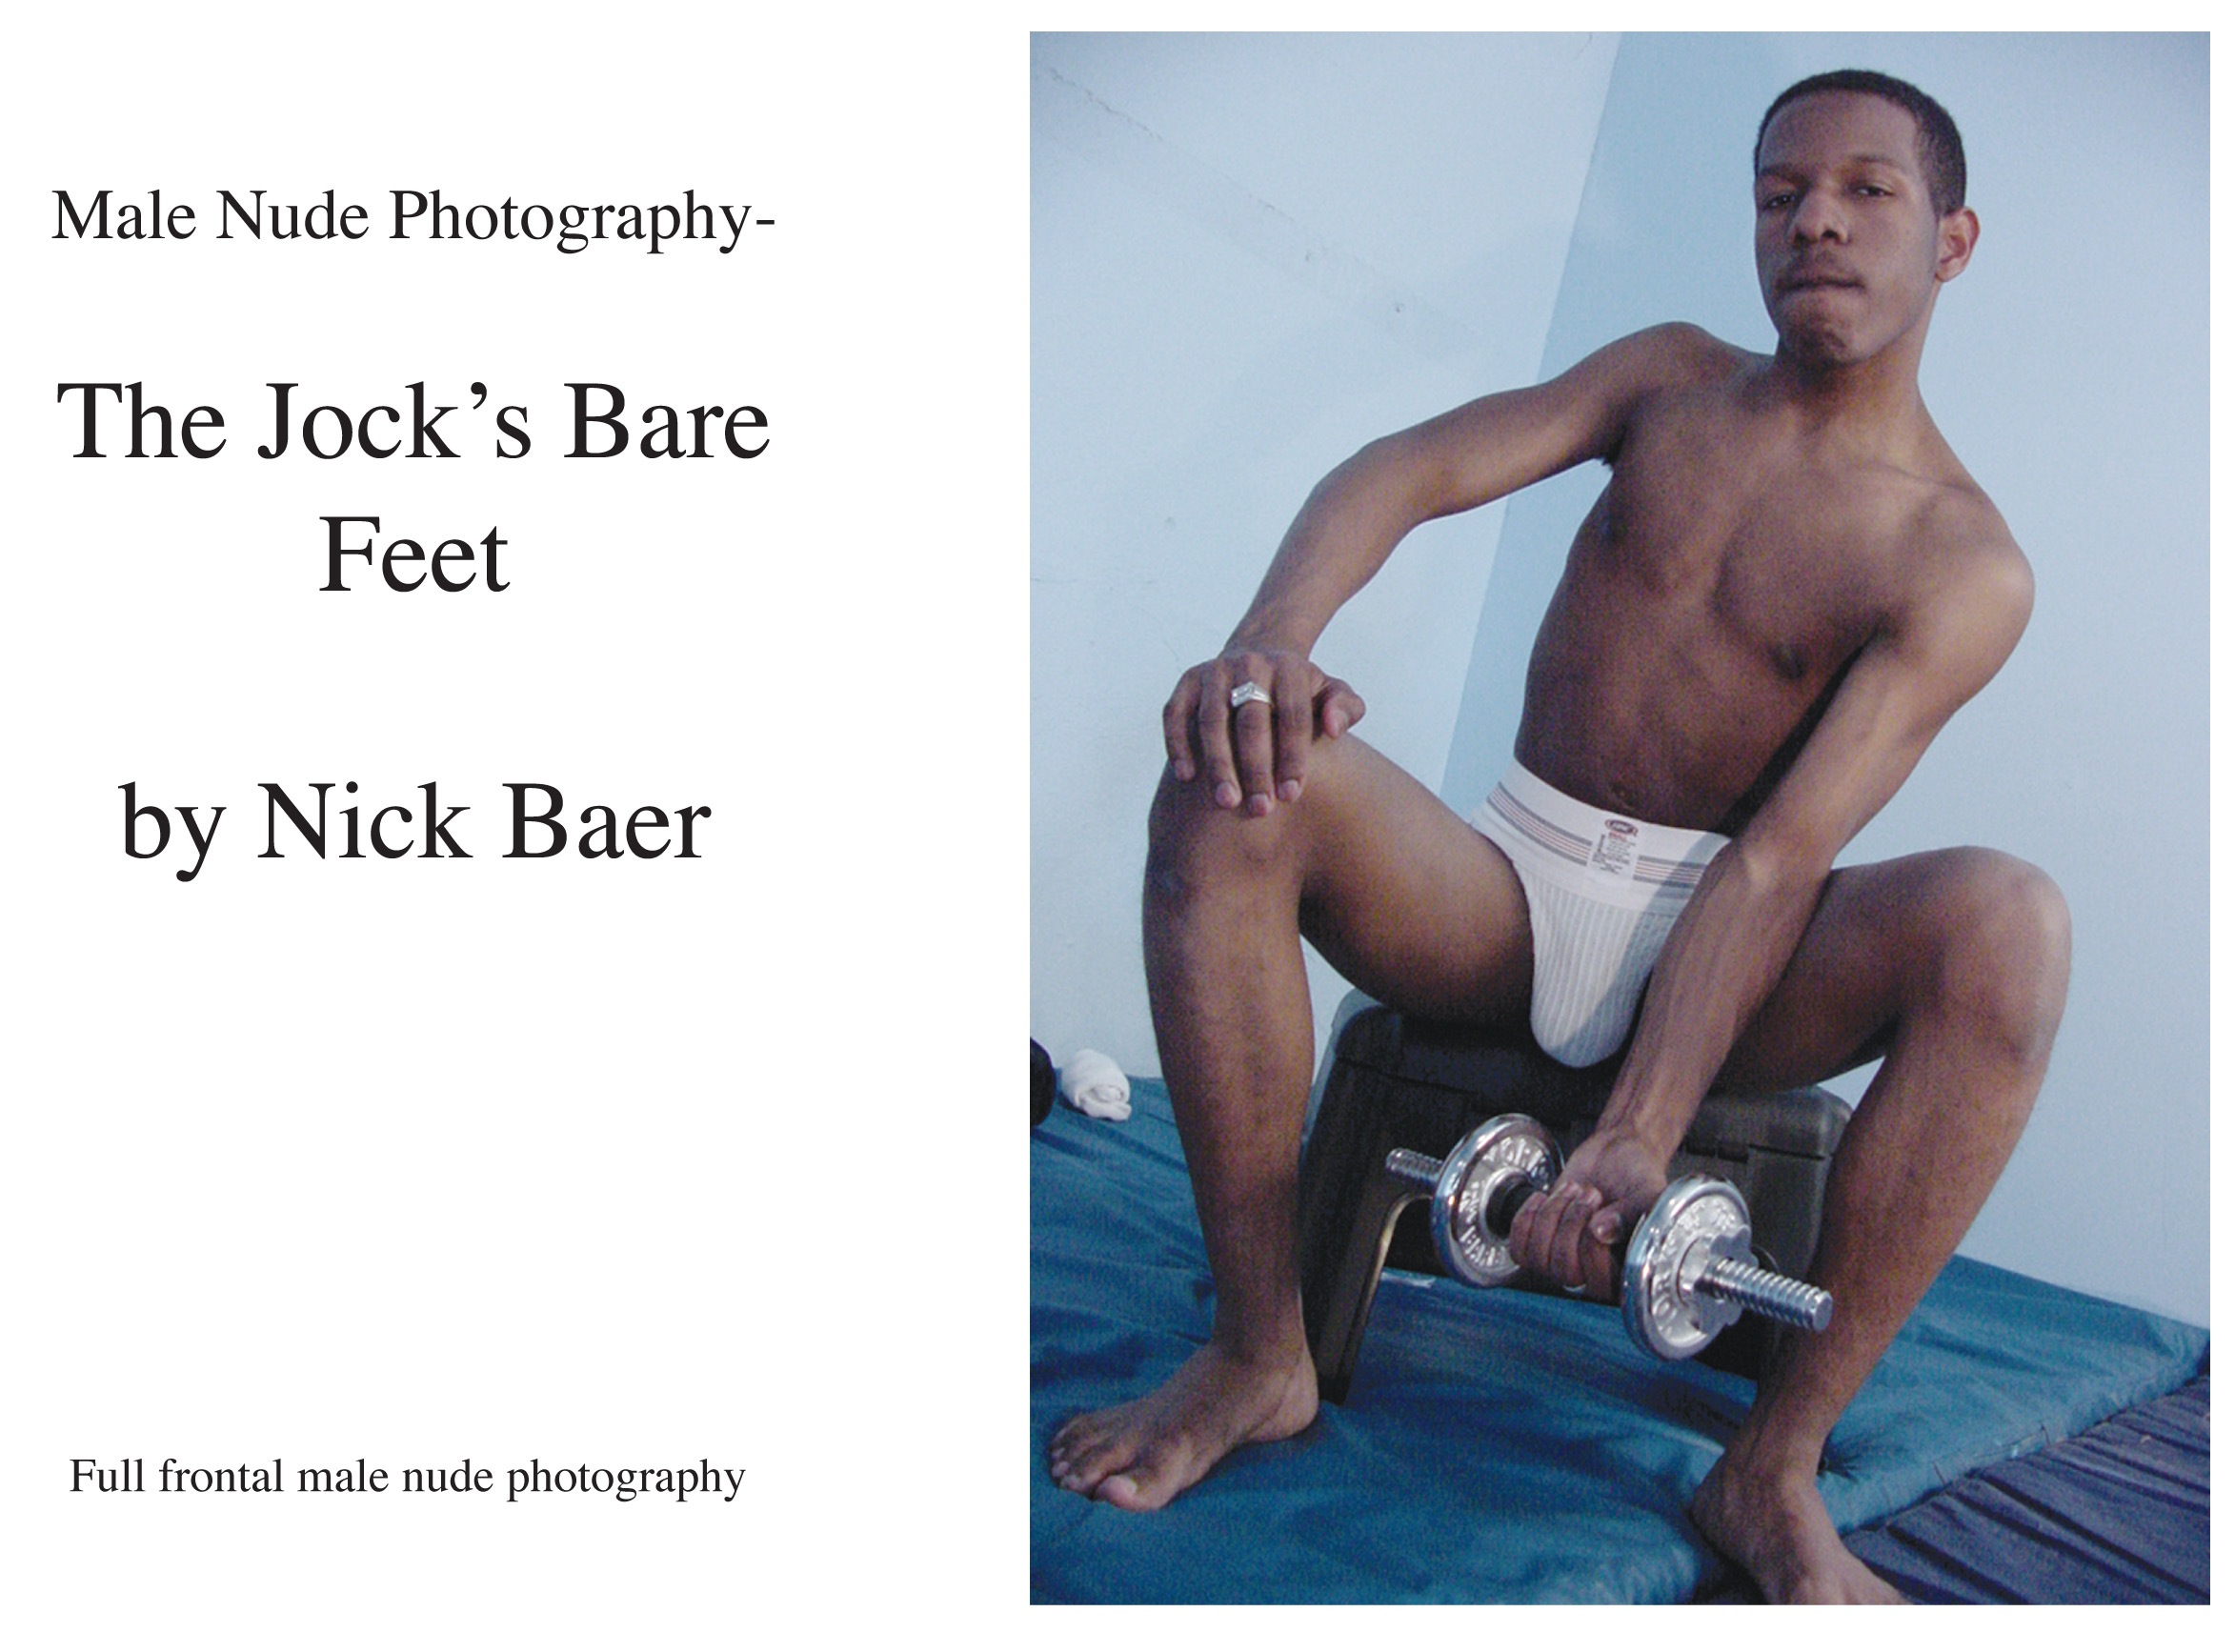 Male Nude Photography- The Jock's Bare Feet Book and eBook